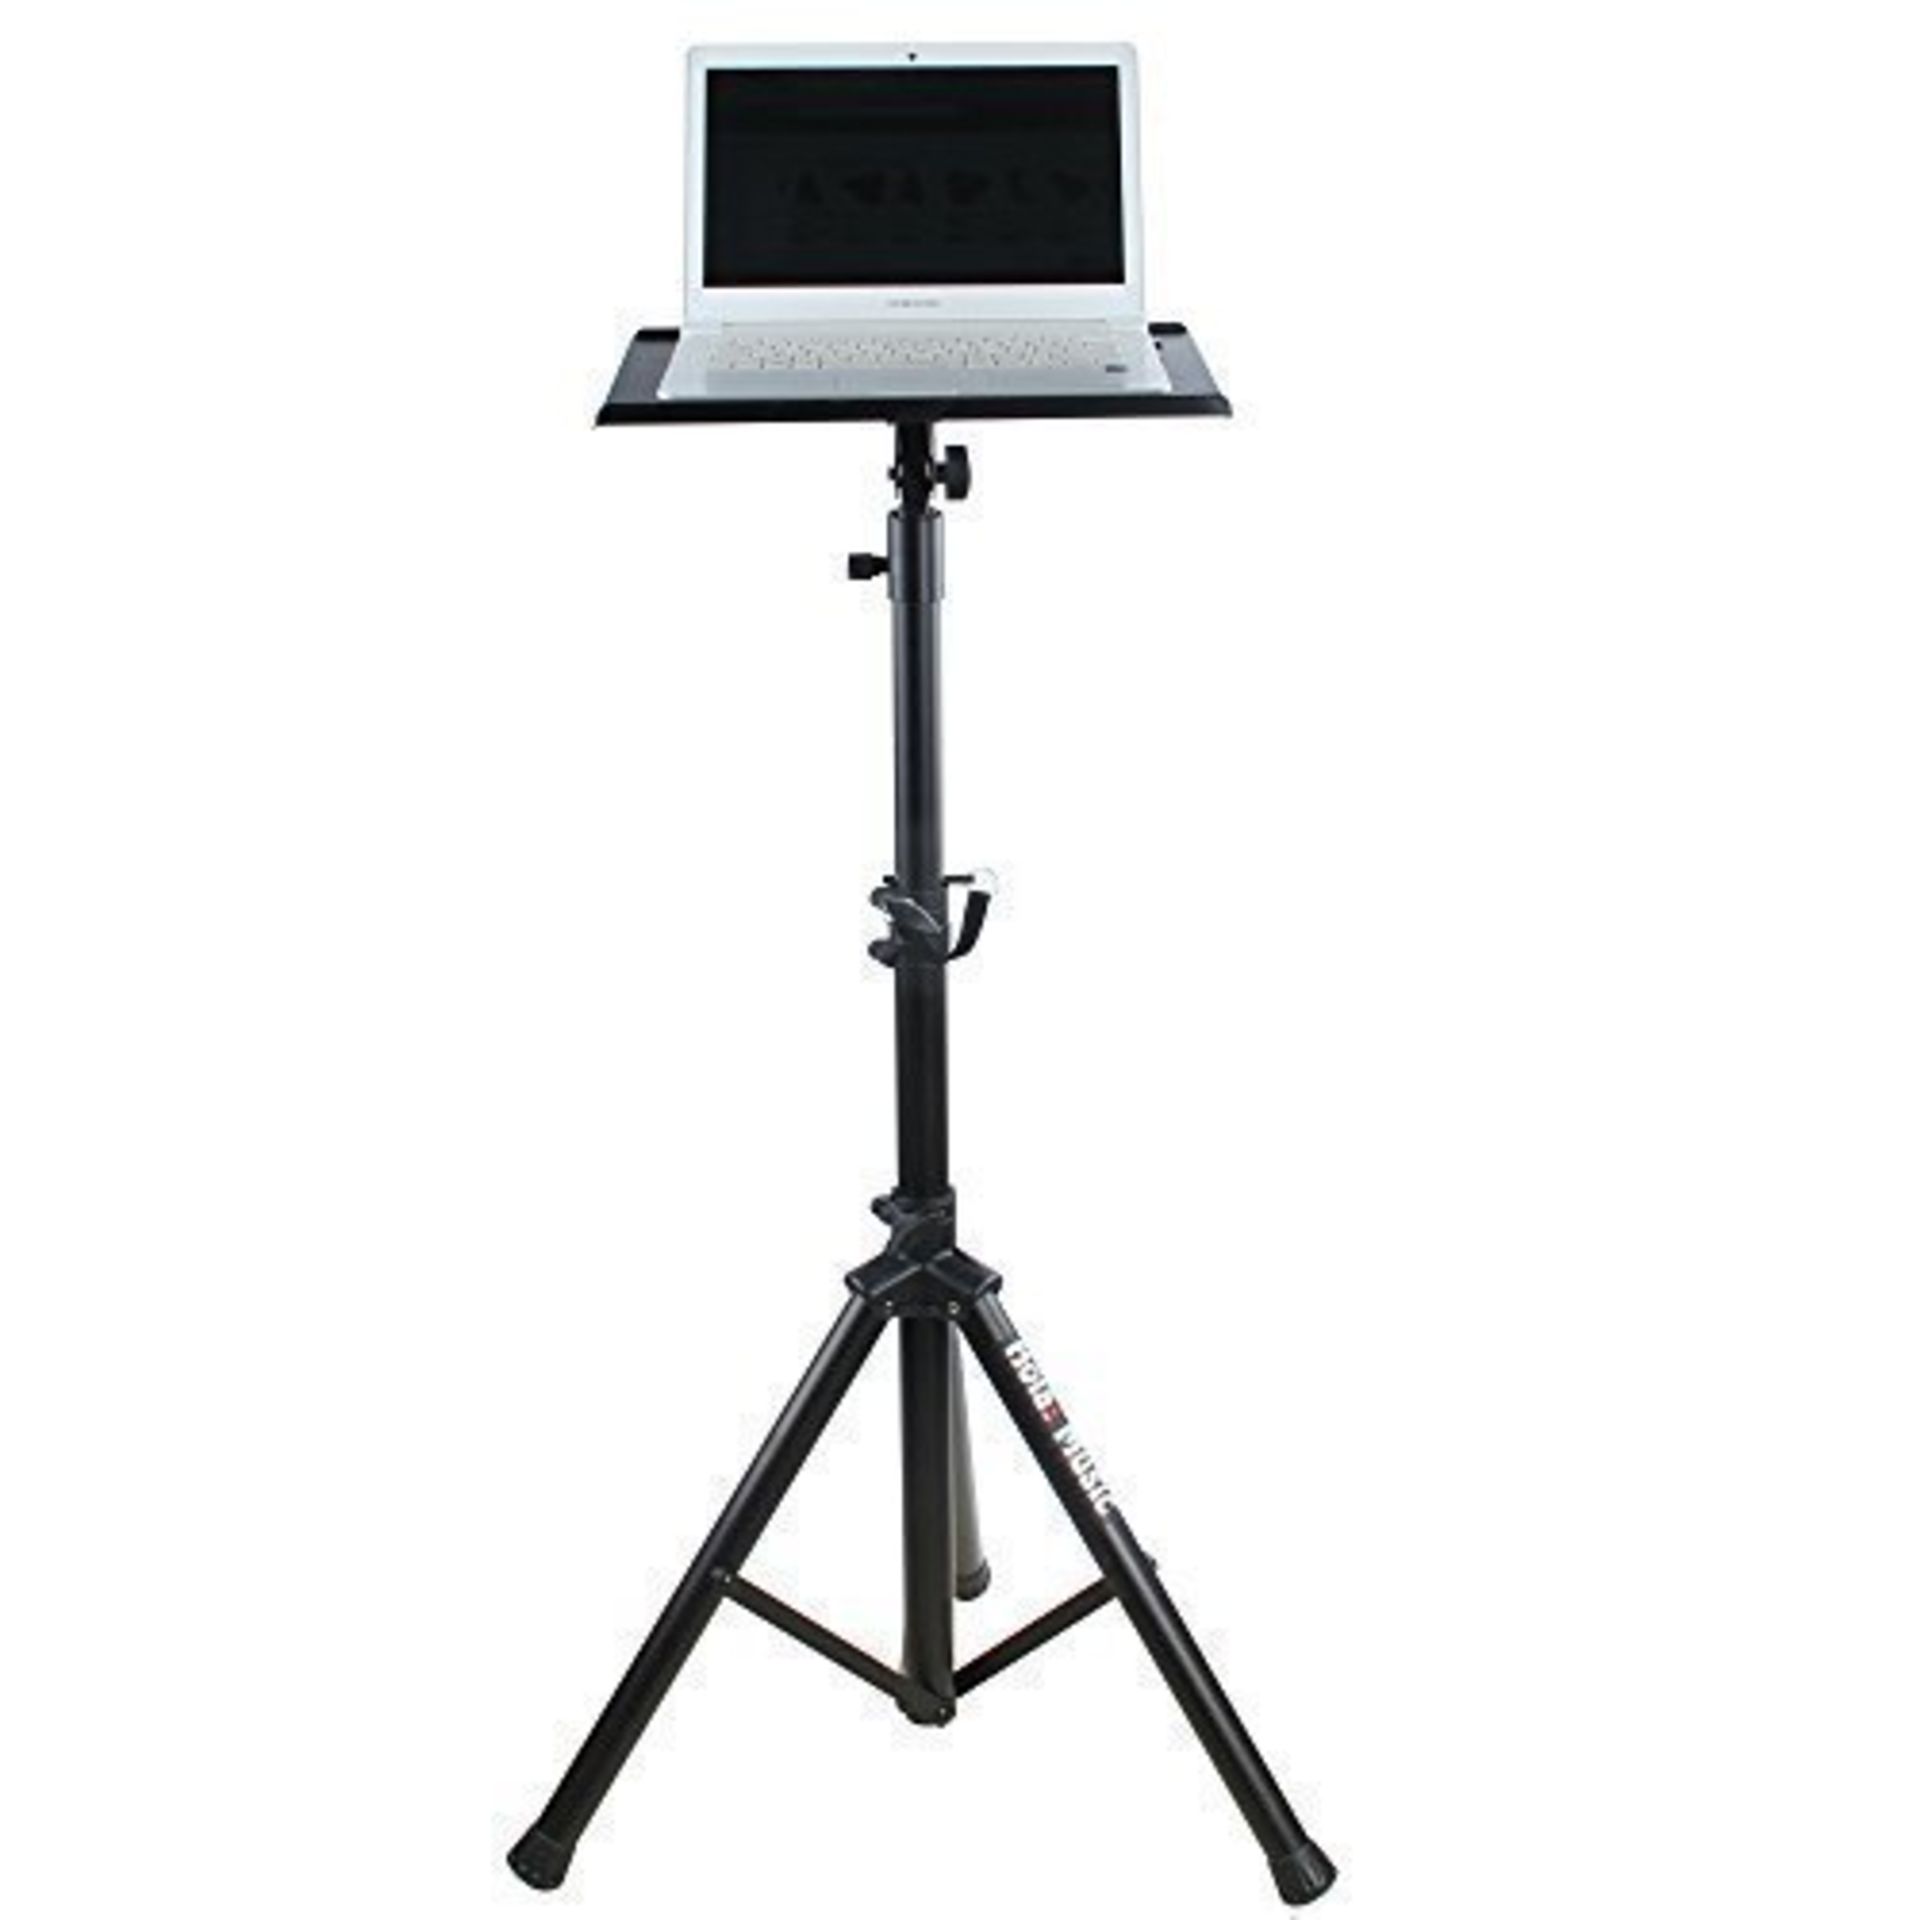 RRP £55.82 Hola! Projector Stand - Heavy Duty Multi-Function Tripod Stand for Laptop